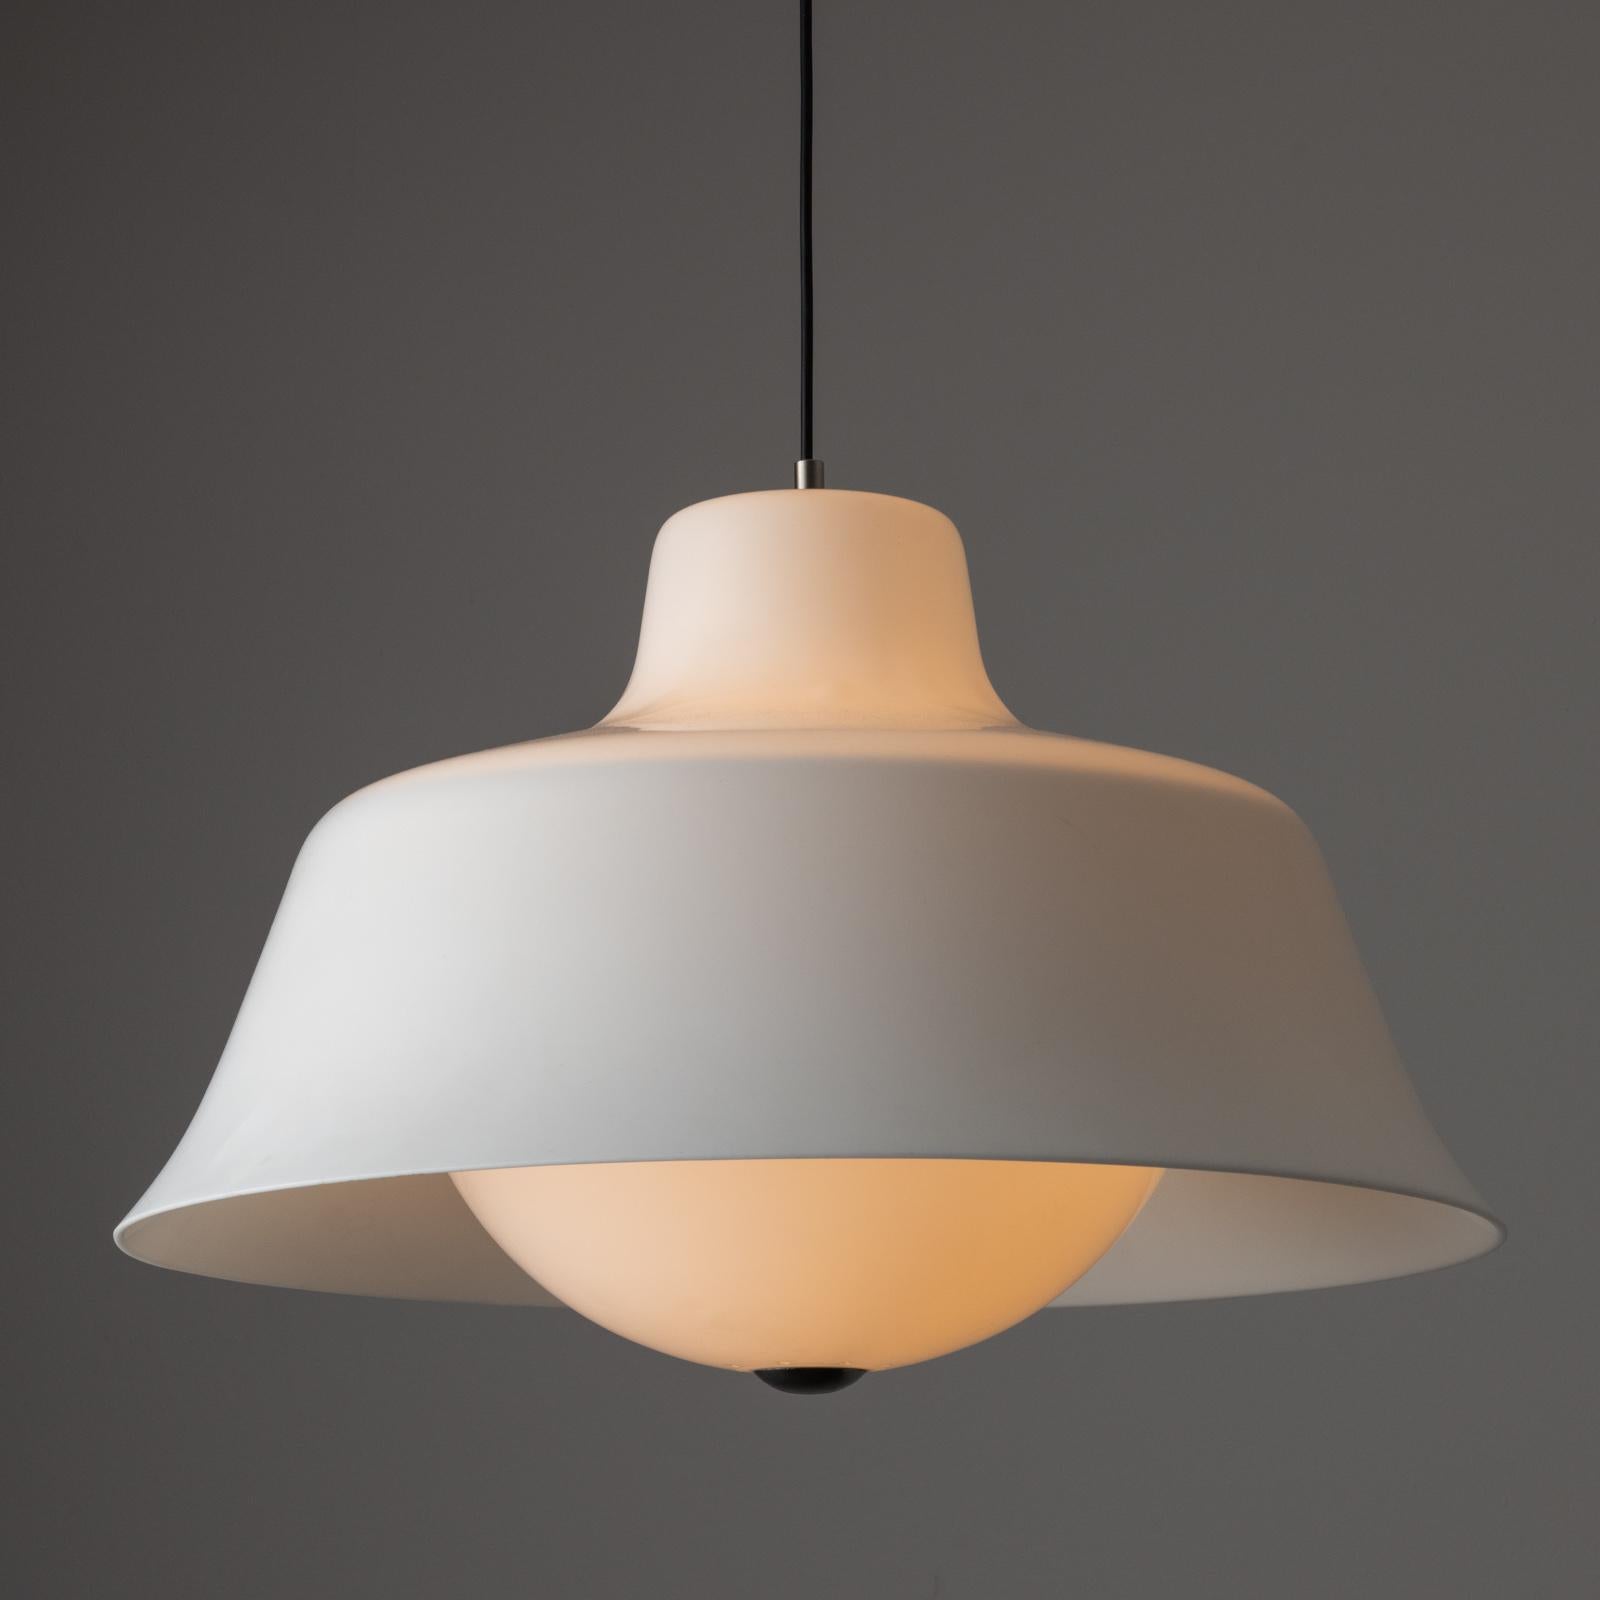 Ceiling Light by Sergio Asti for Kartell. Designed and manufactured in Italy, circa 1960. White acrylic suspension lamp with bell shaped shade and brass detailing. The lamp holds one E27 bulb socket, adapted for the US. We recommend using a 40w